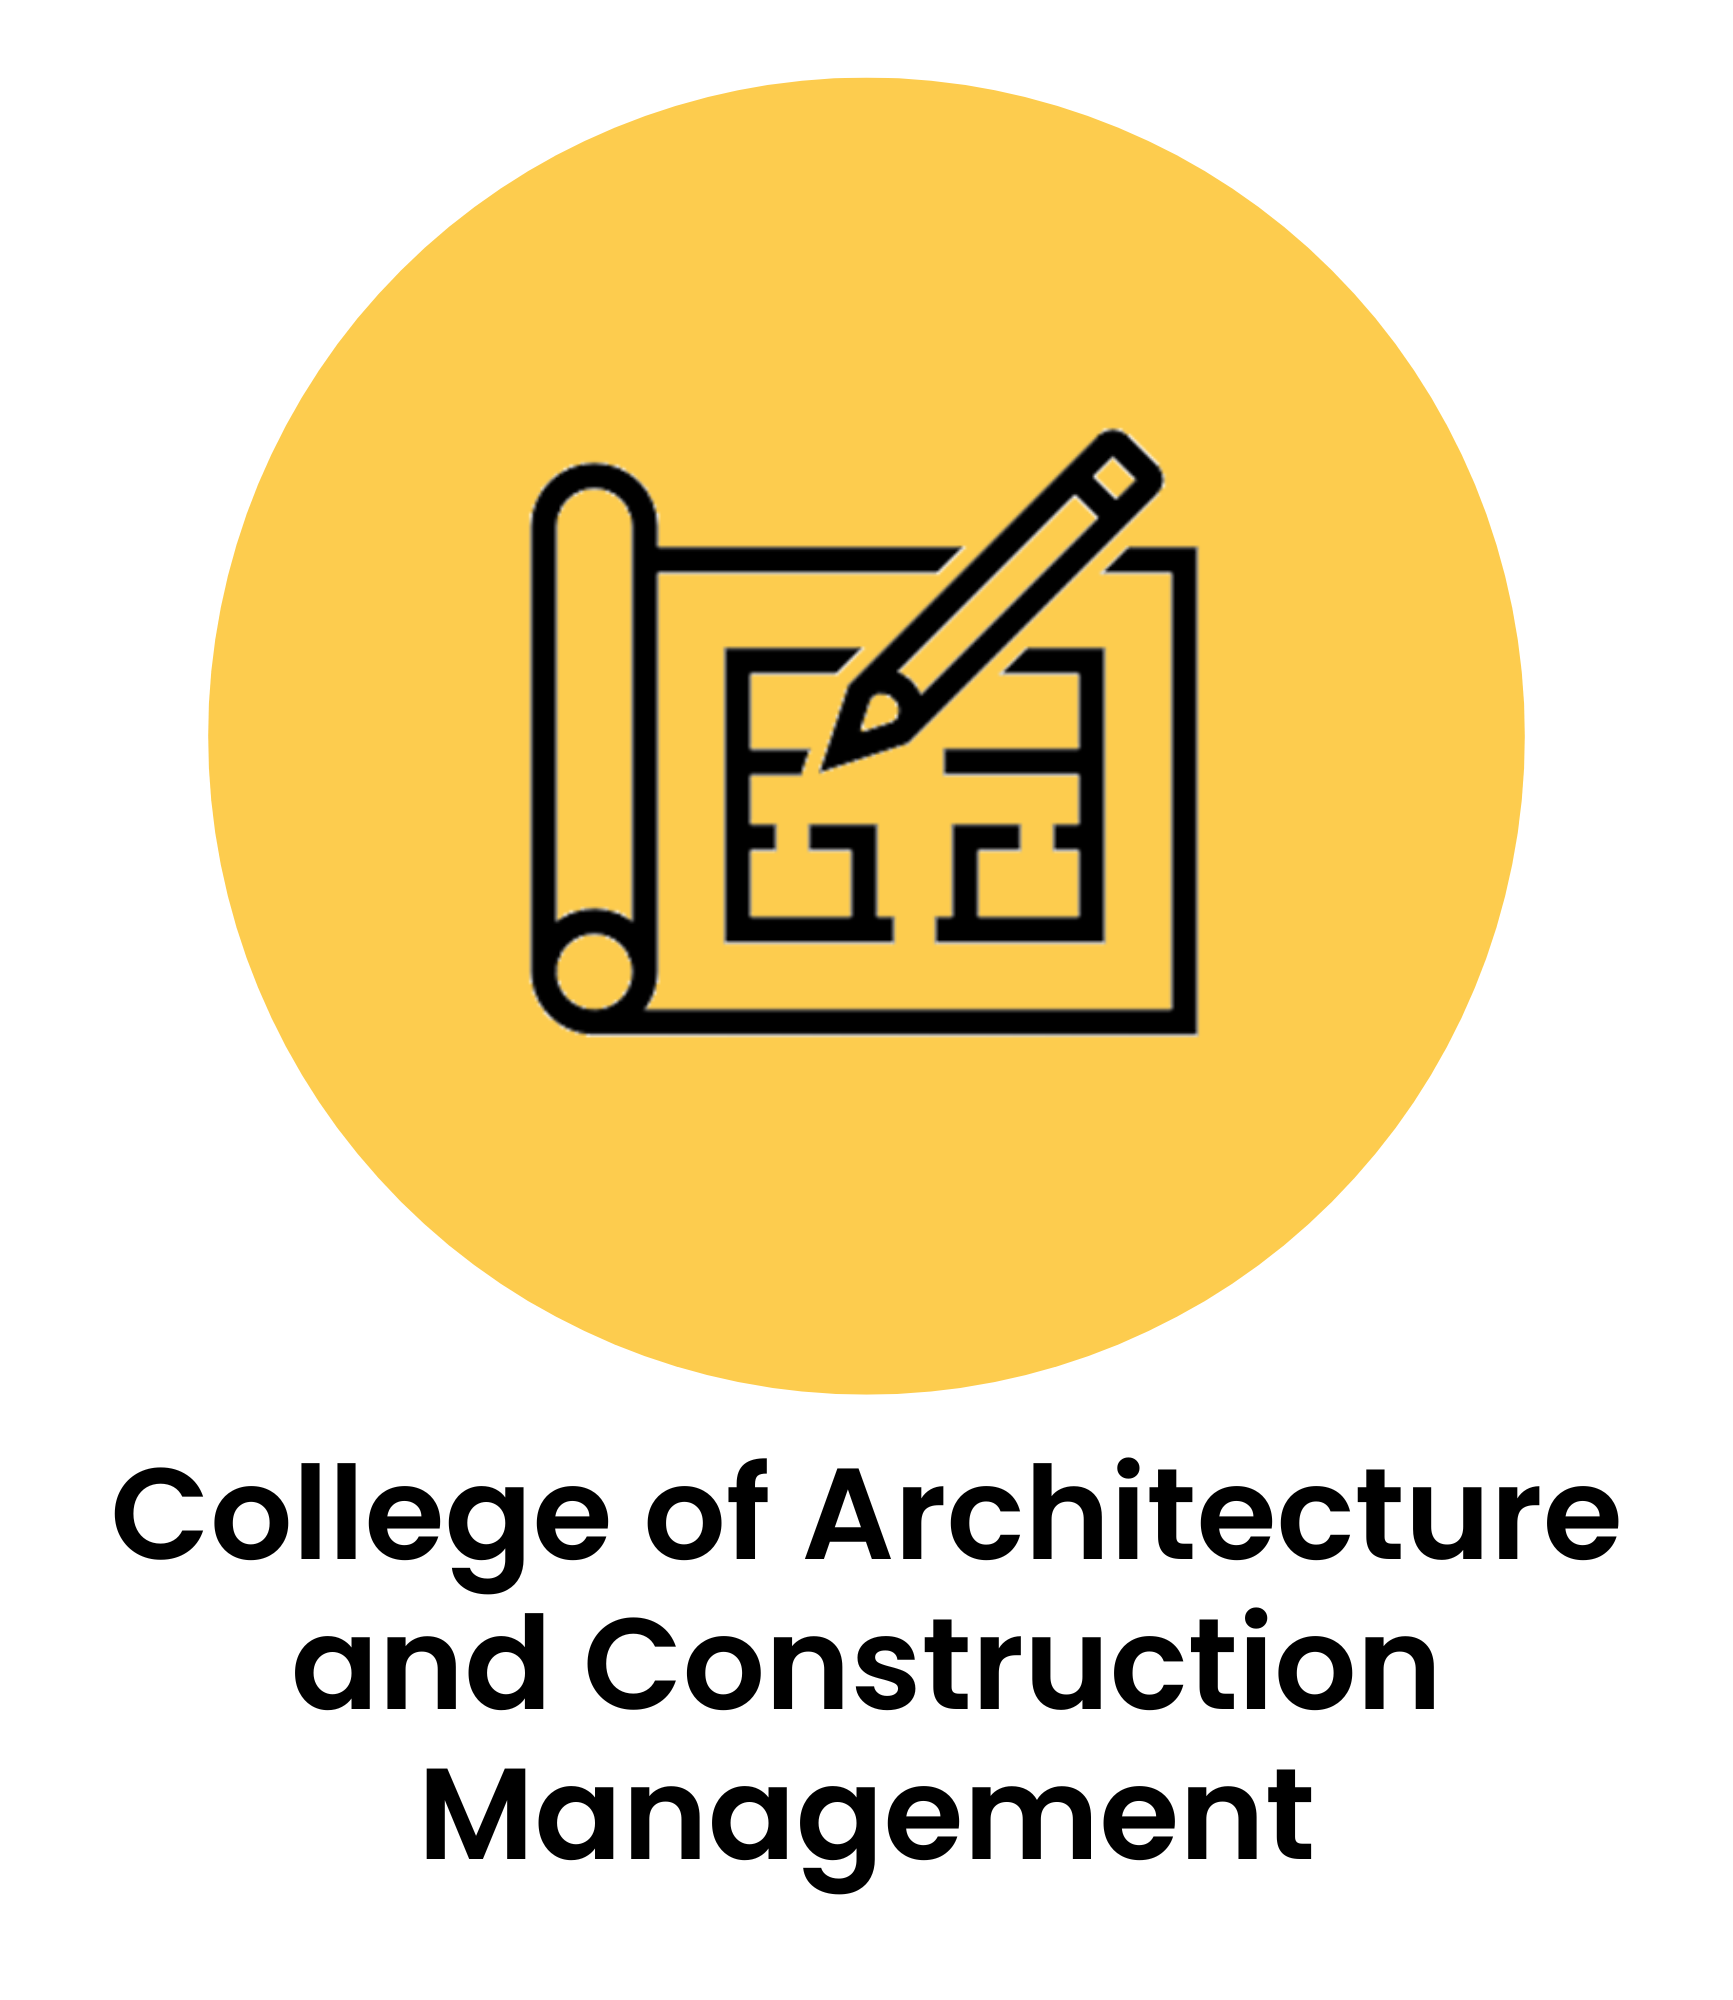 [text] College of Architecture and Construction Management